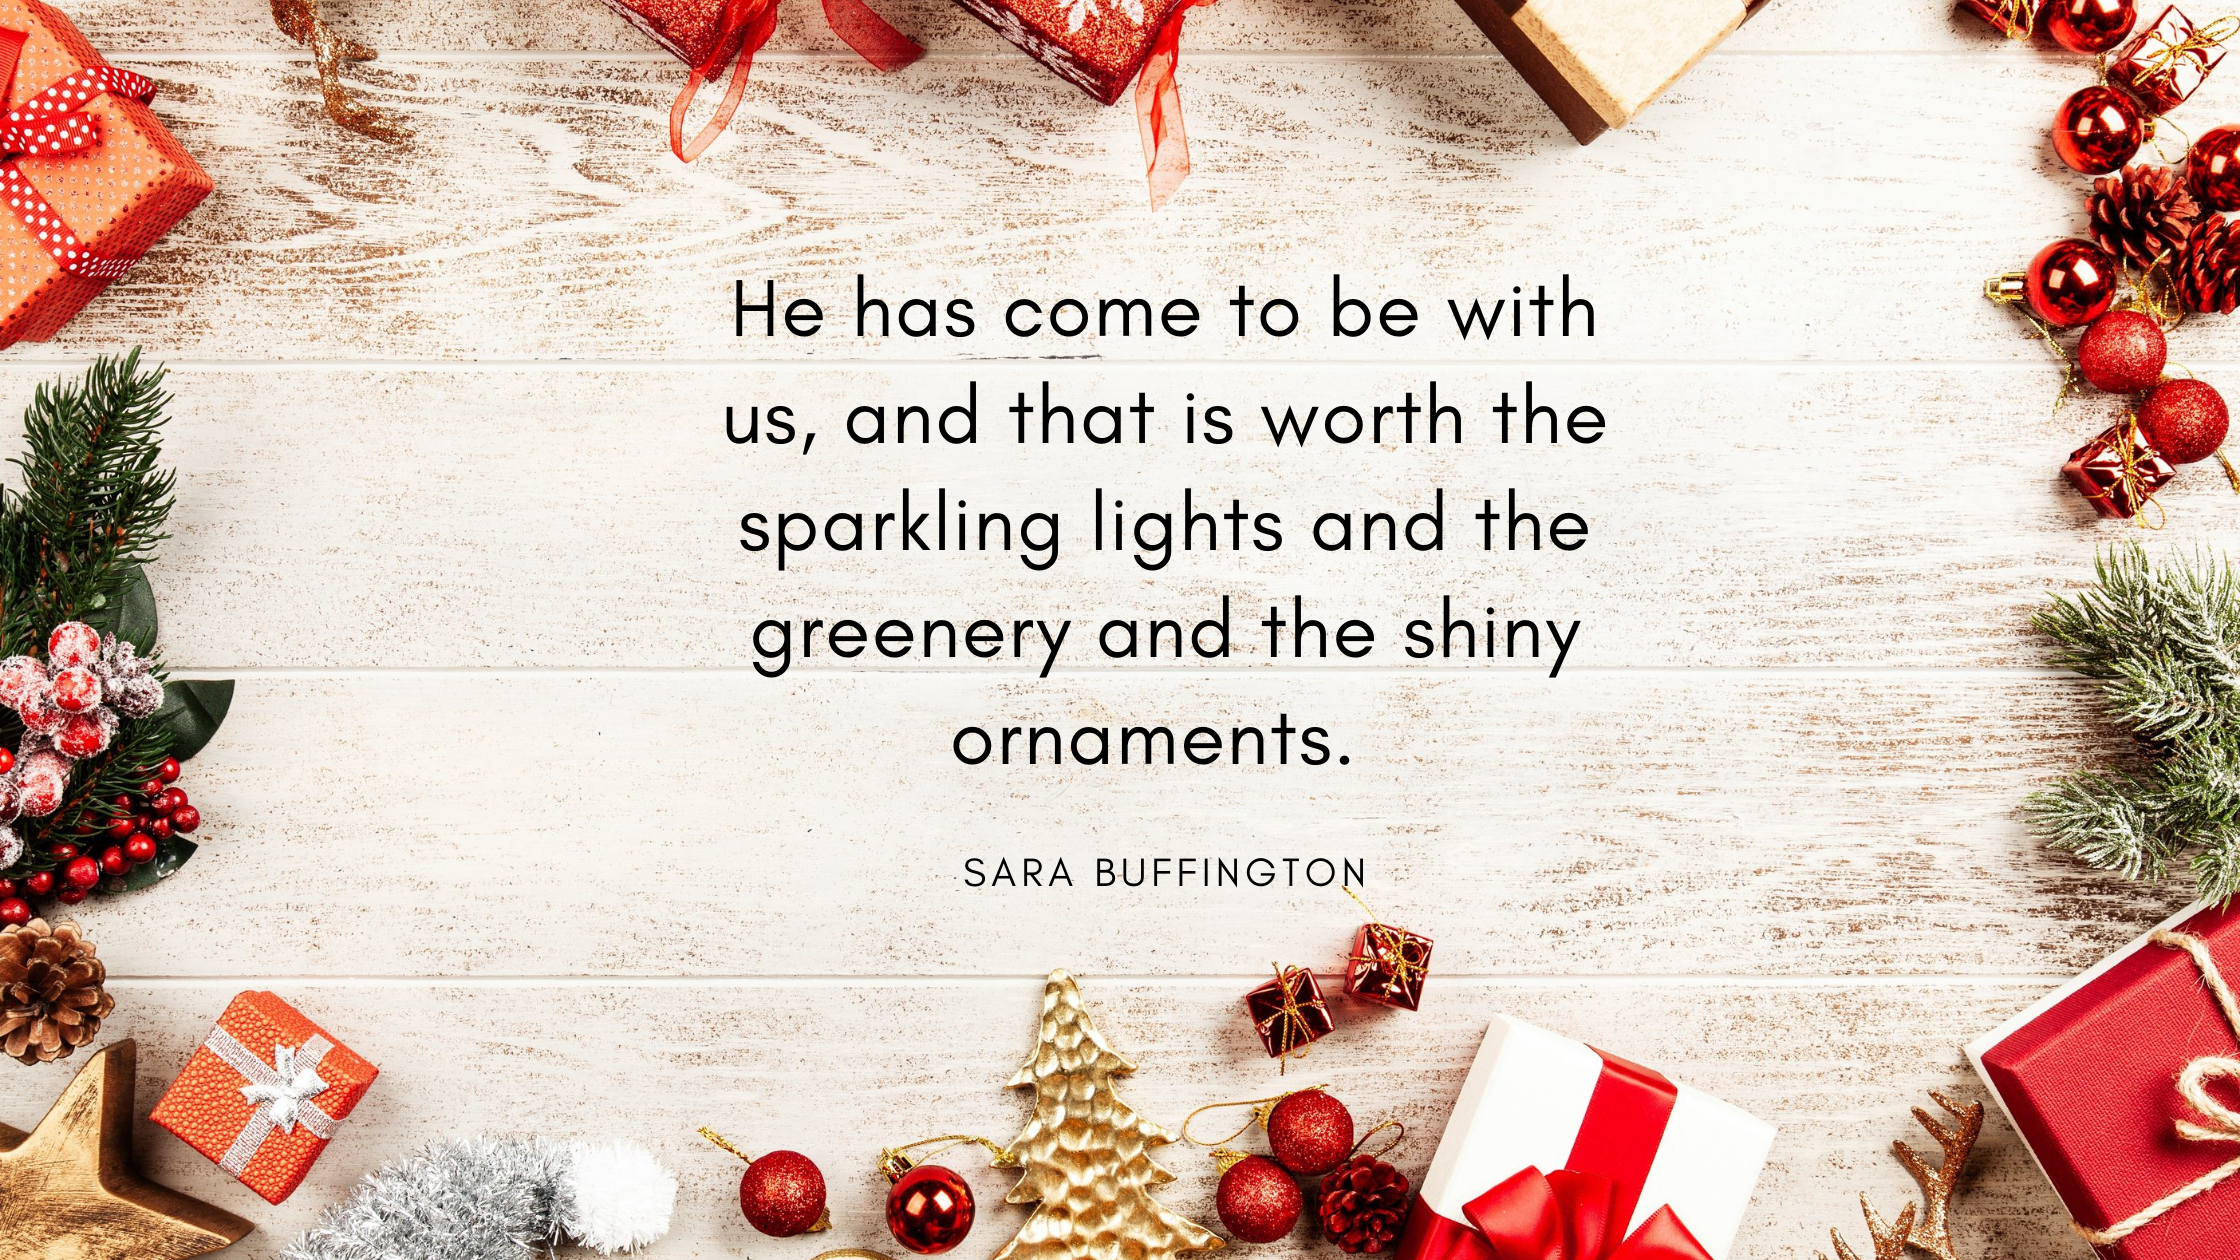 He has come to be with us–that is worth the sparkling lights and the greenery and the shiny ornaments.